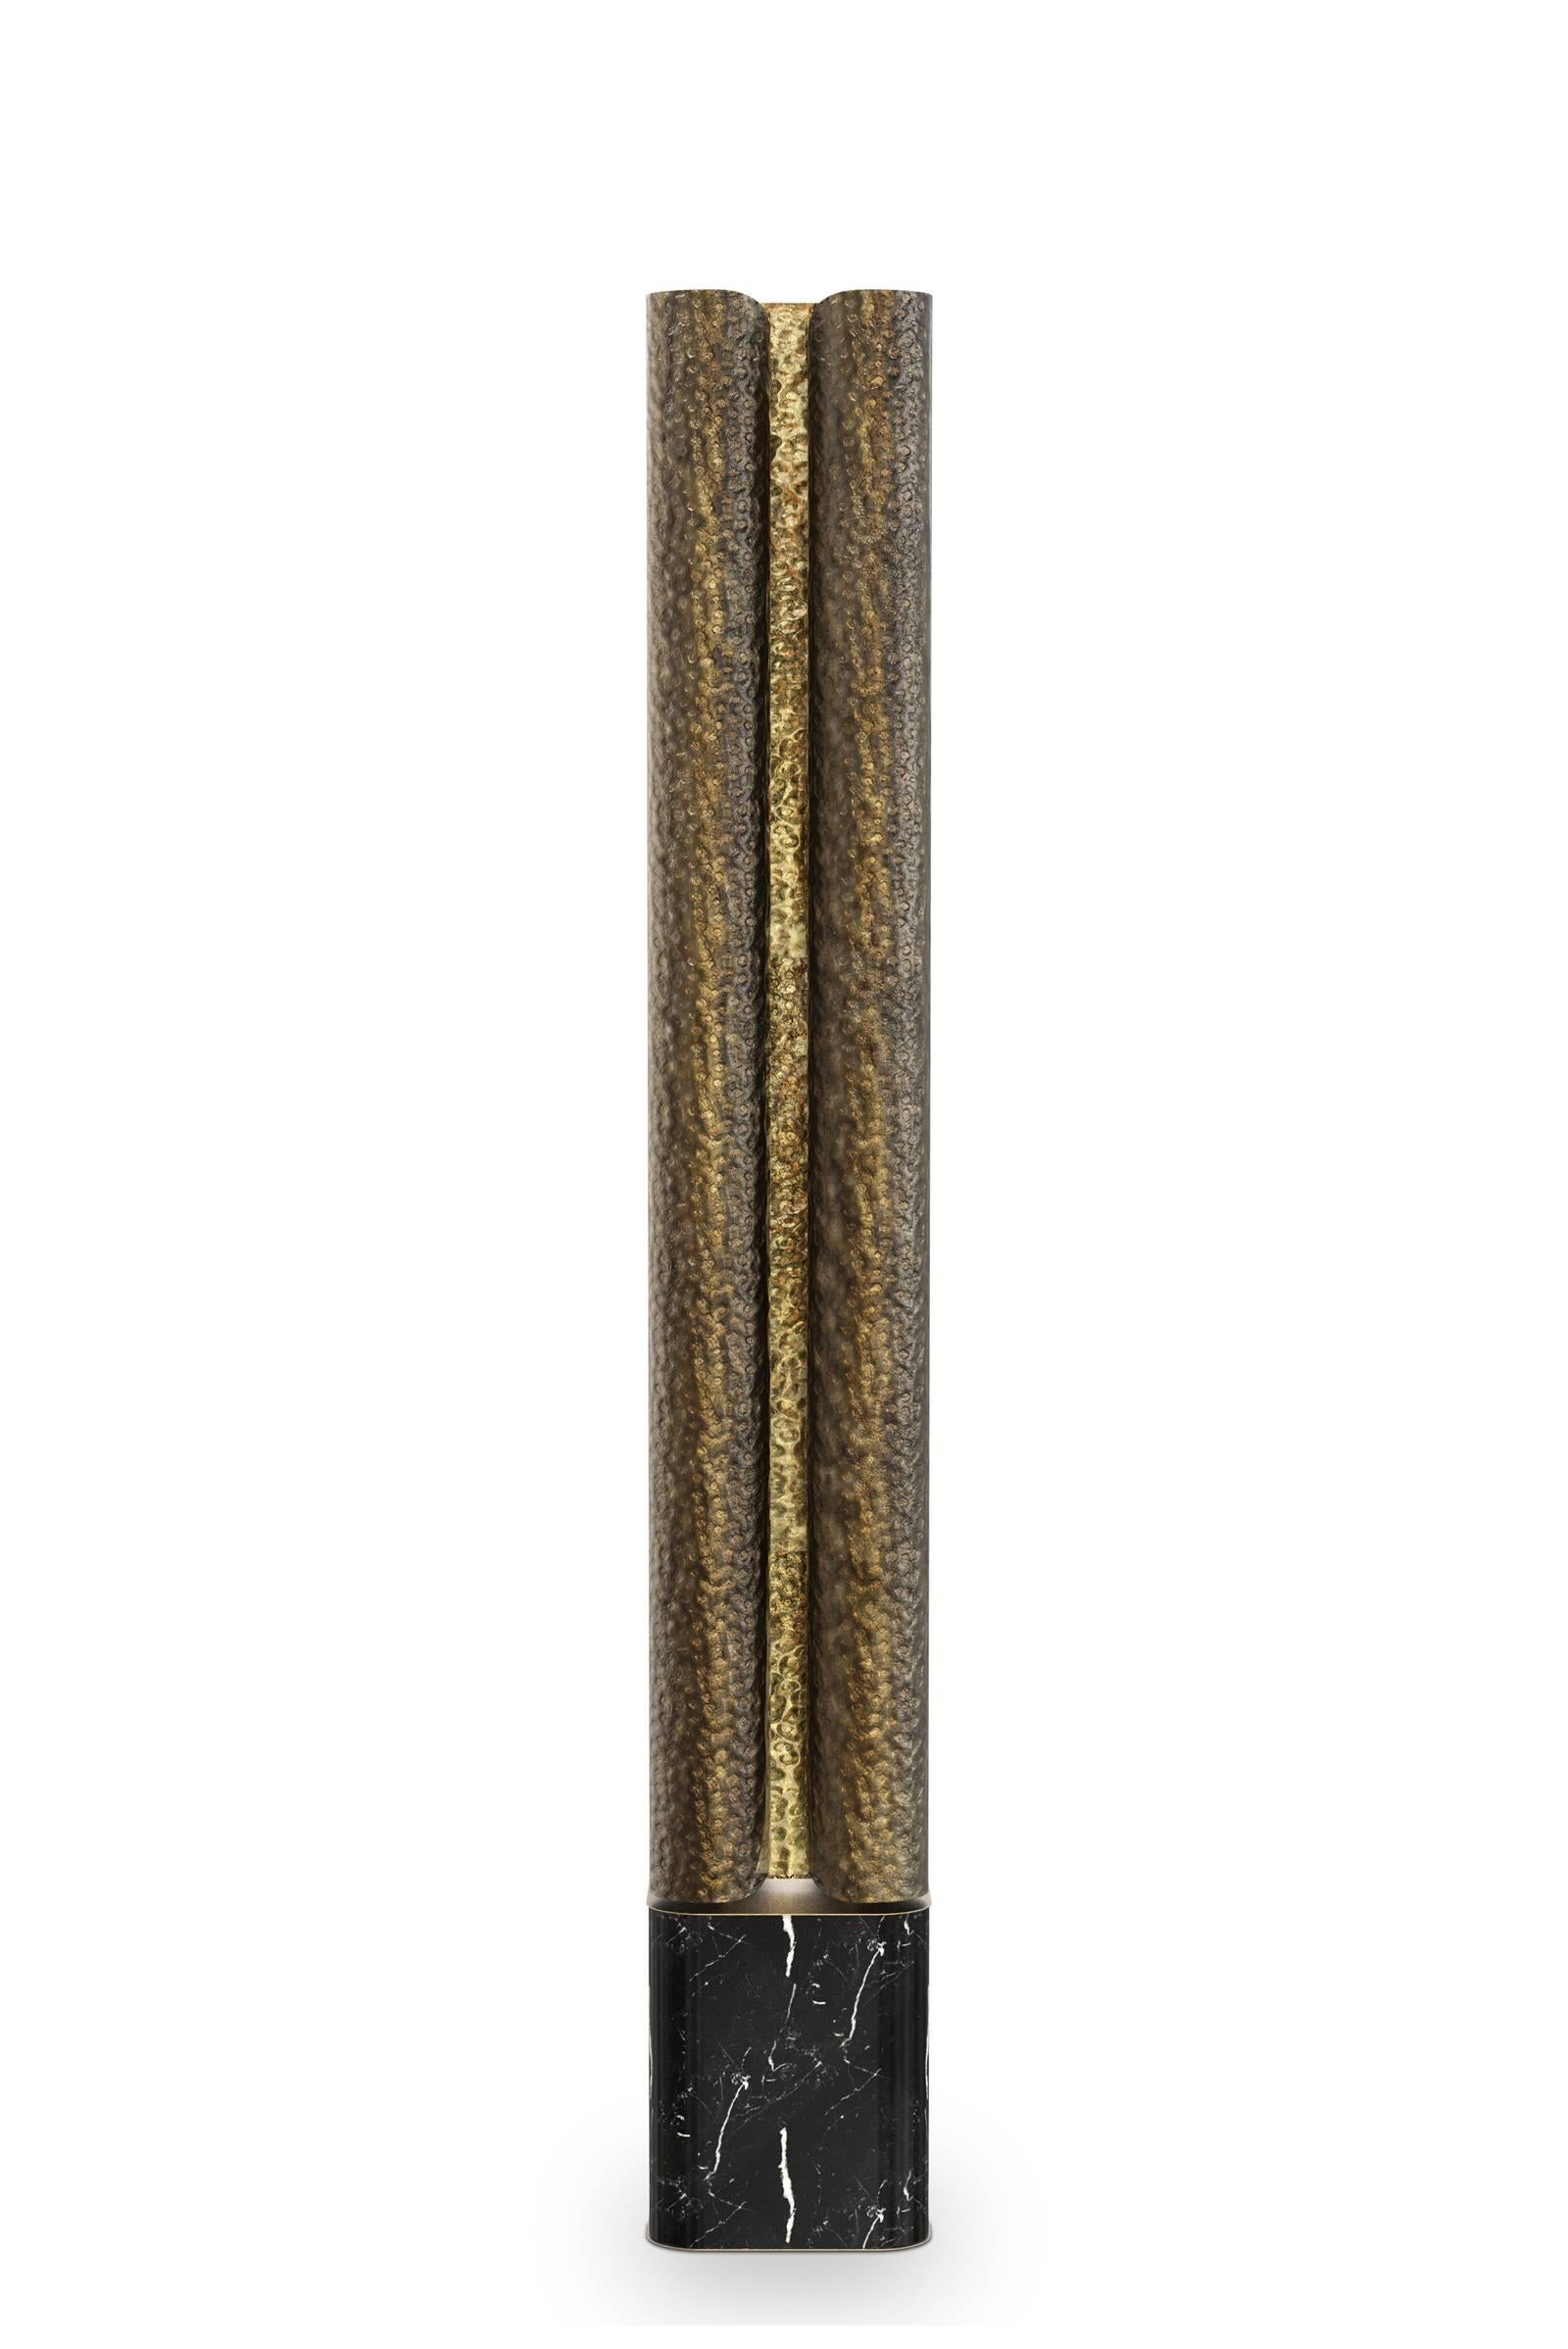 Floor lamp Tuba with handcrafted hammered aged
brush brass. Polished brass inside. Base in Nero 
Marquina marble. 